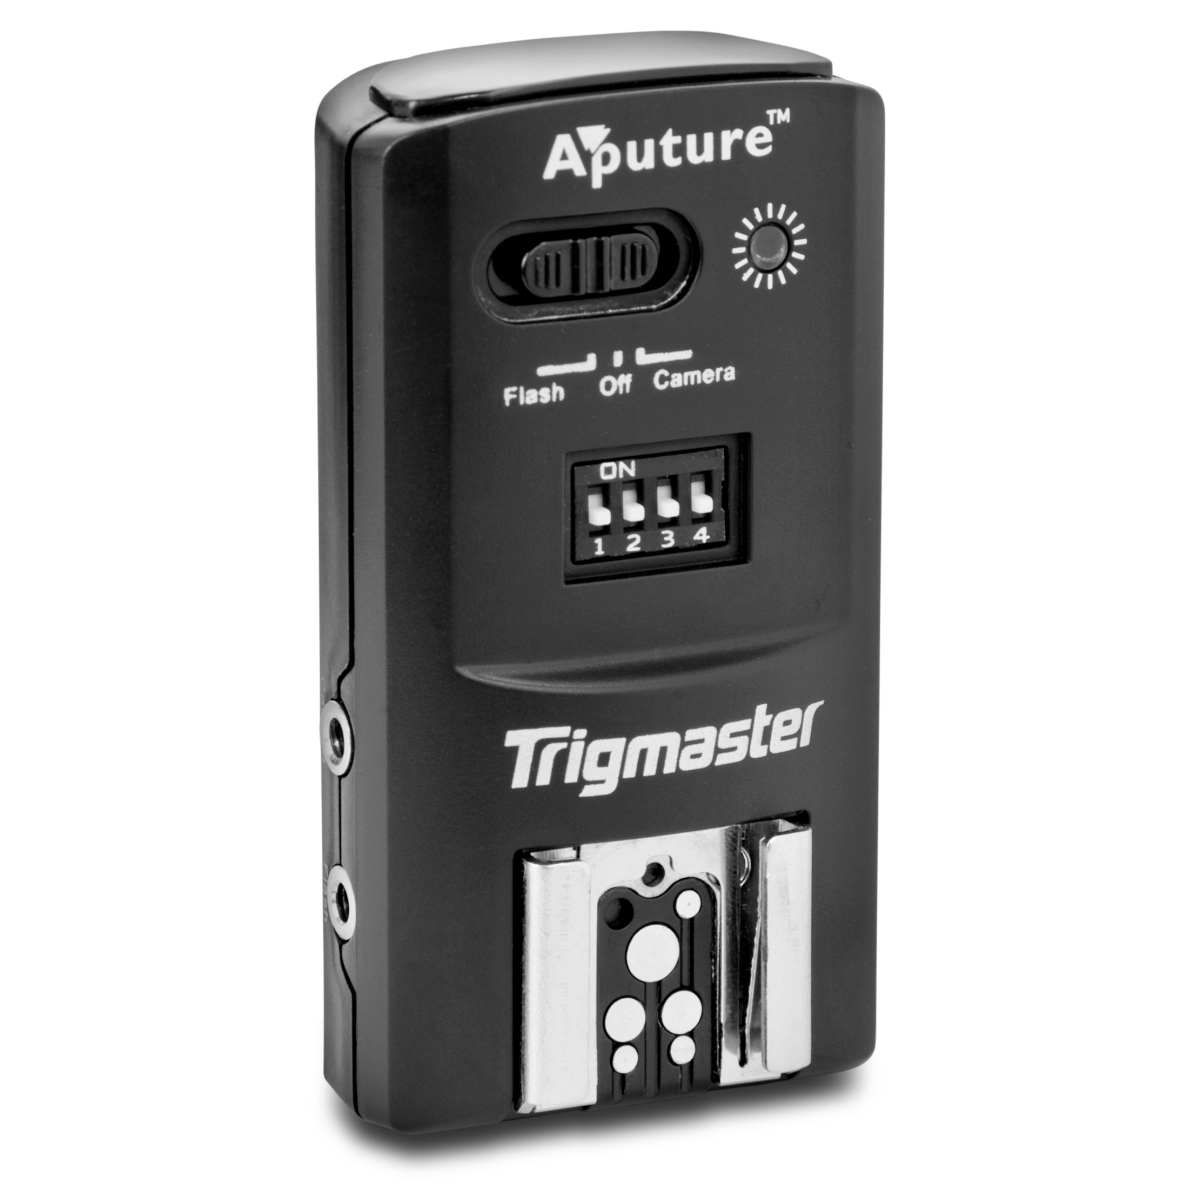 Aputure Trigmaster 2.4G MX/TX Receiver for Sony